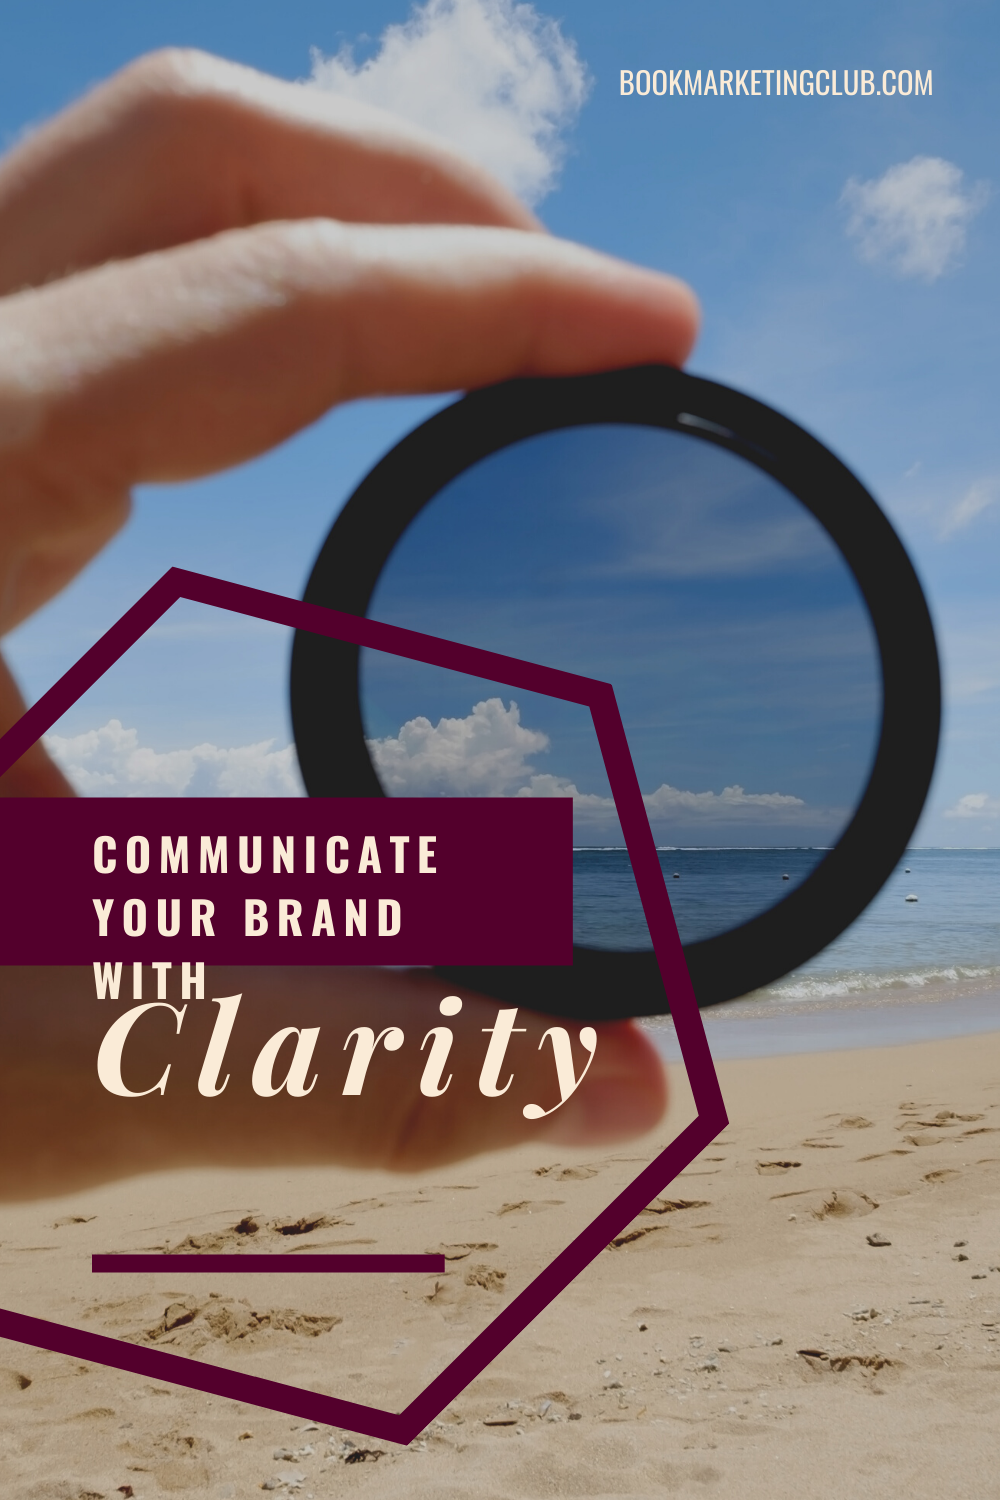 Communicate your brand with Clarity